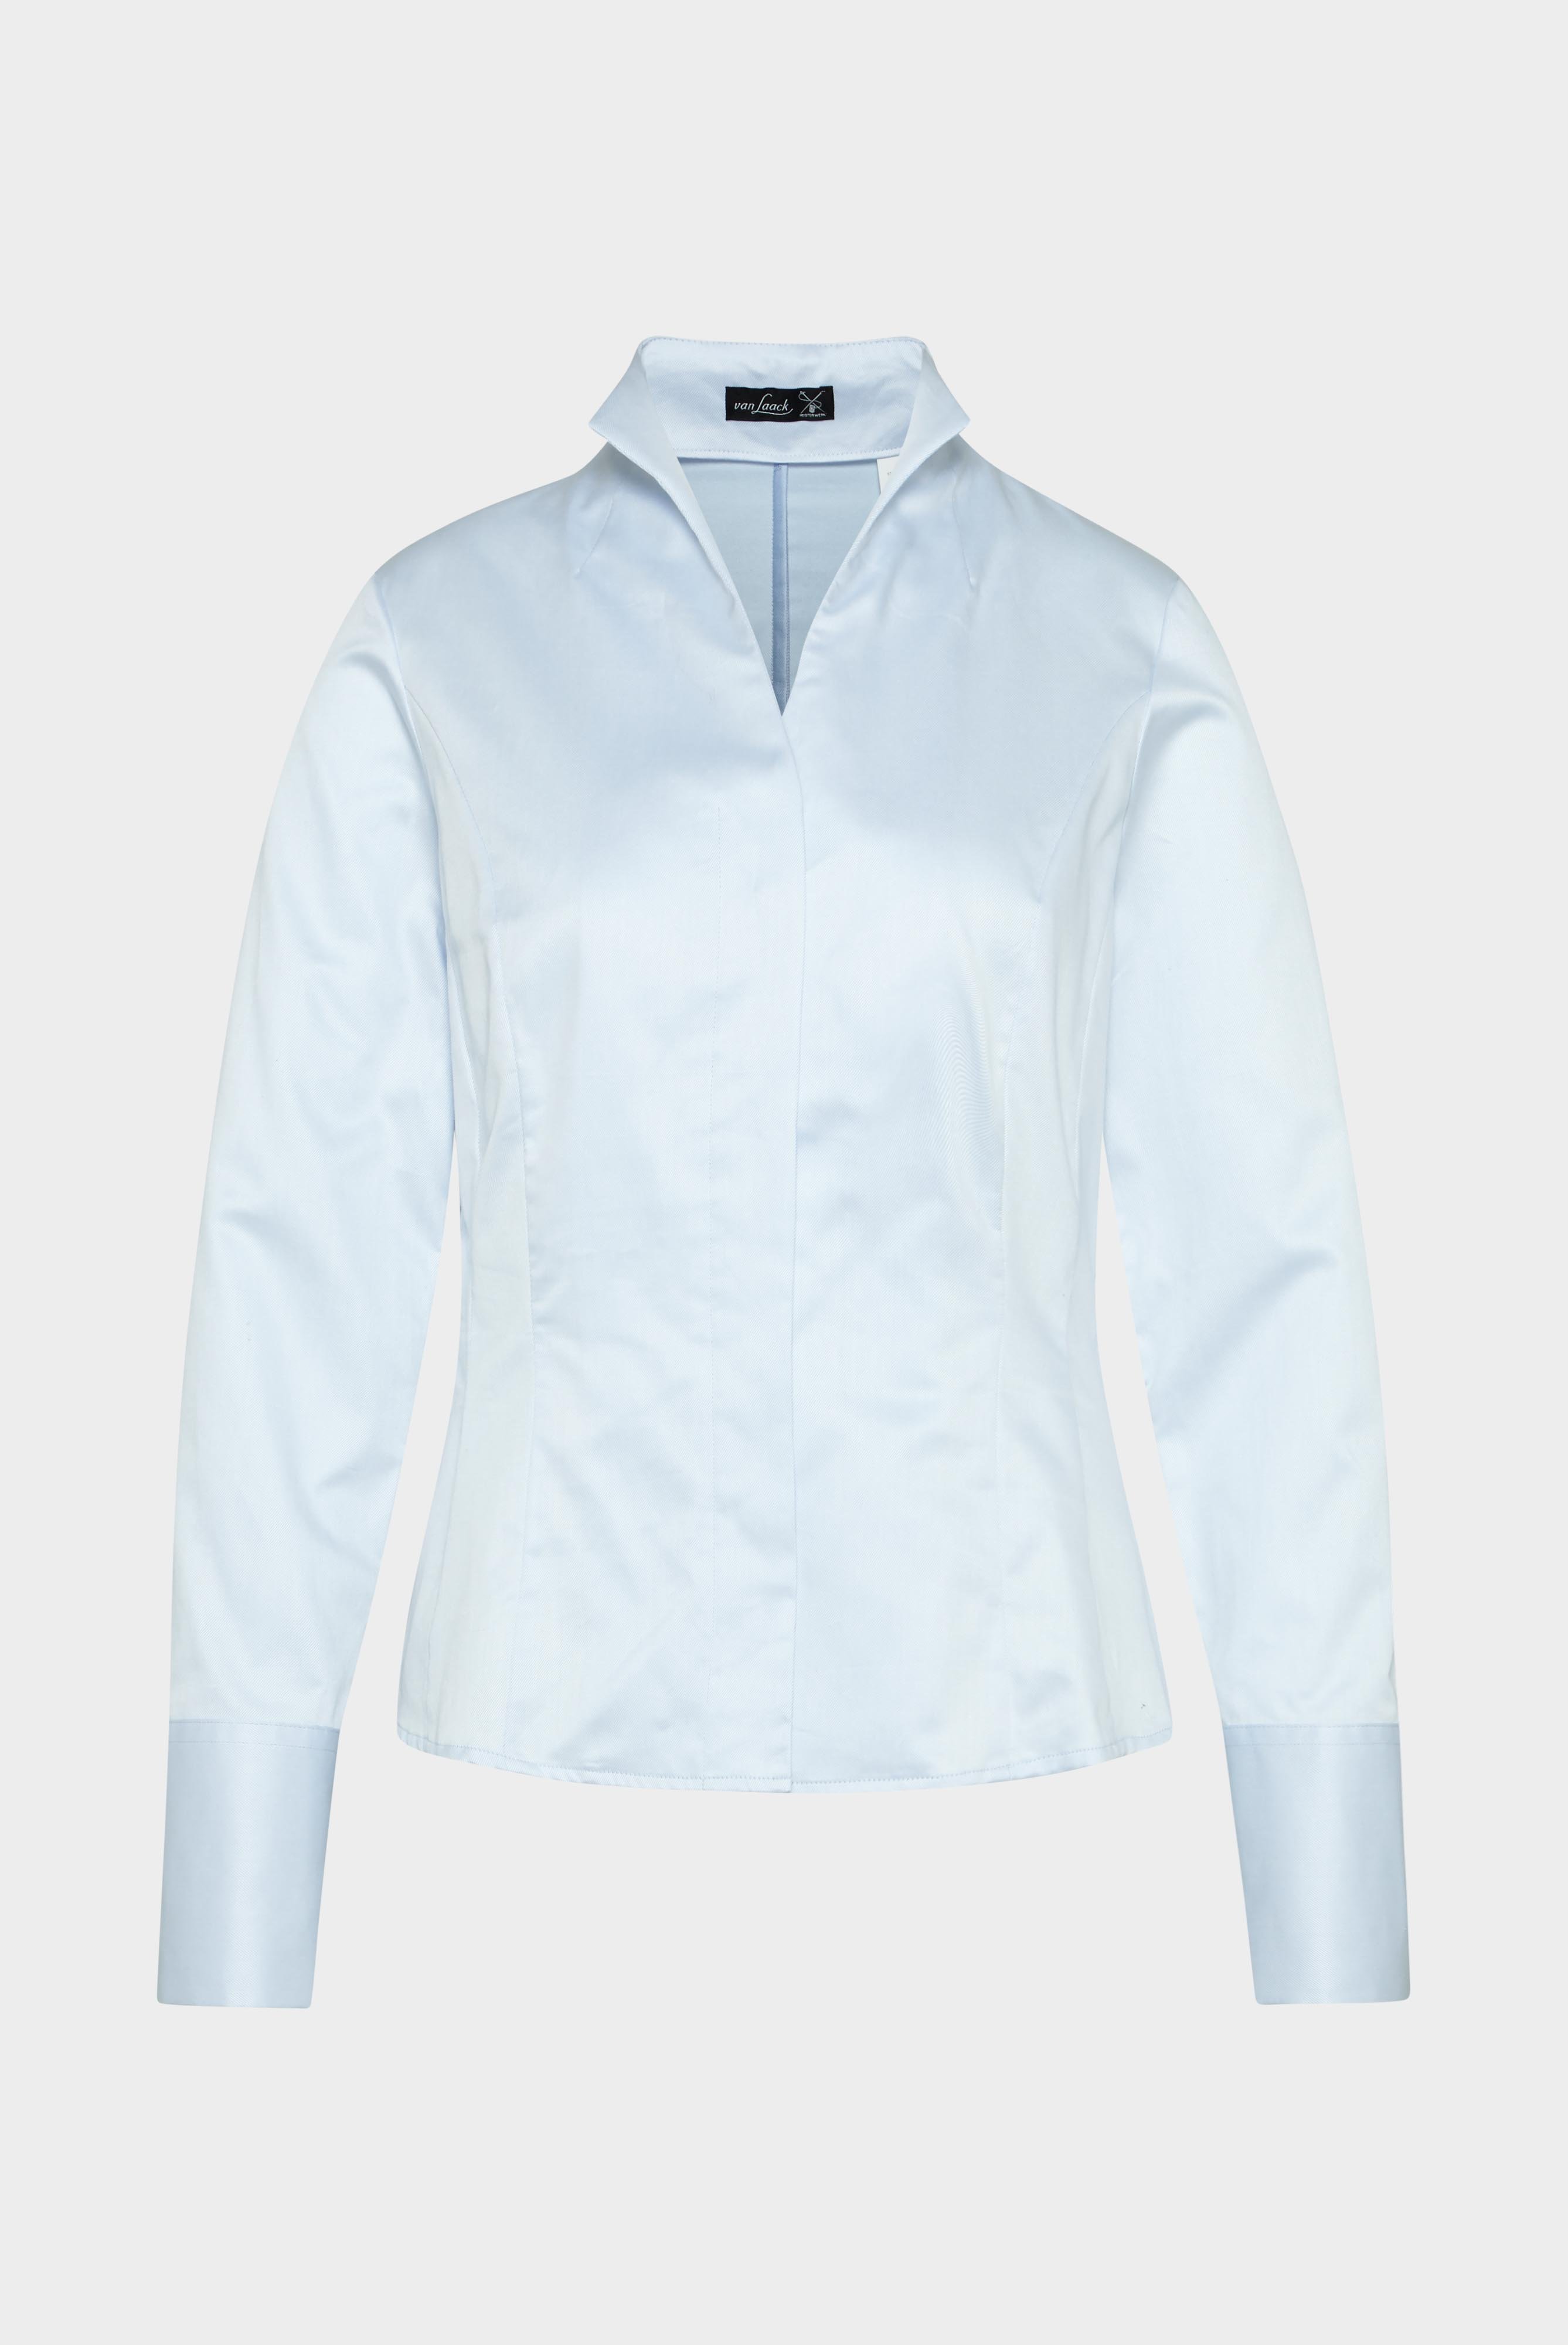 Business Blouses+Twill Chalice Collar Blouse+05.3612.73.130148.710.46